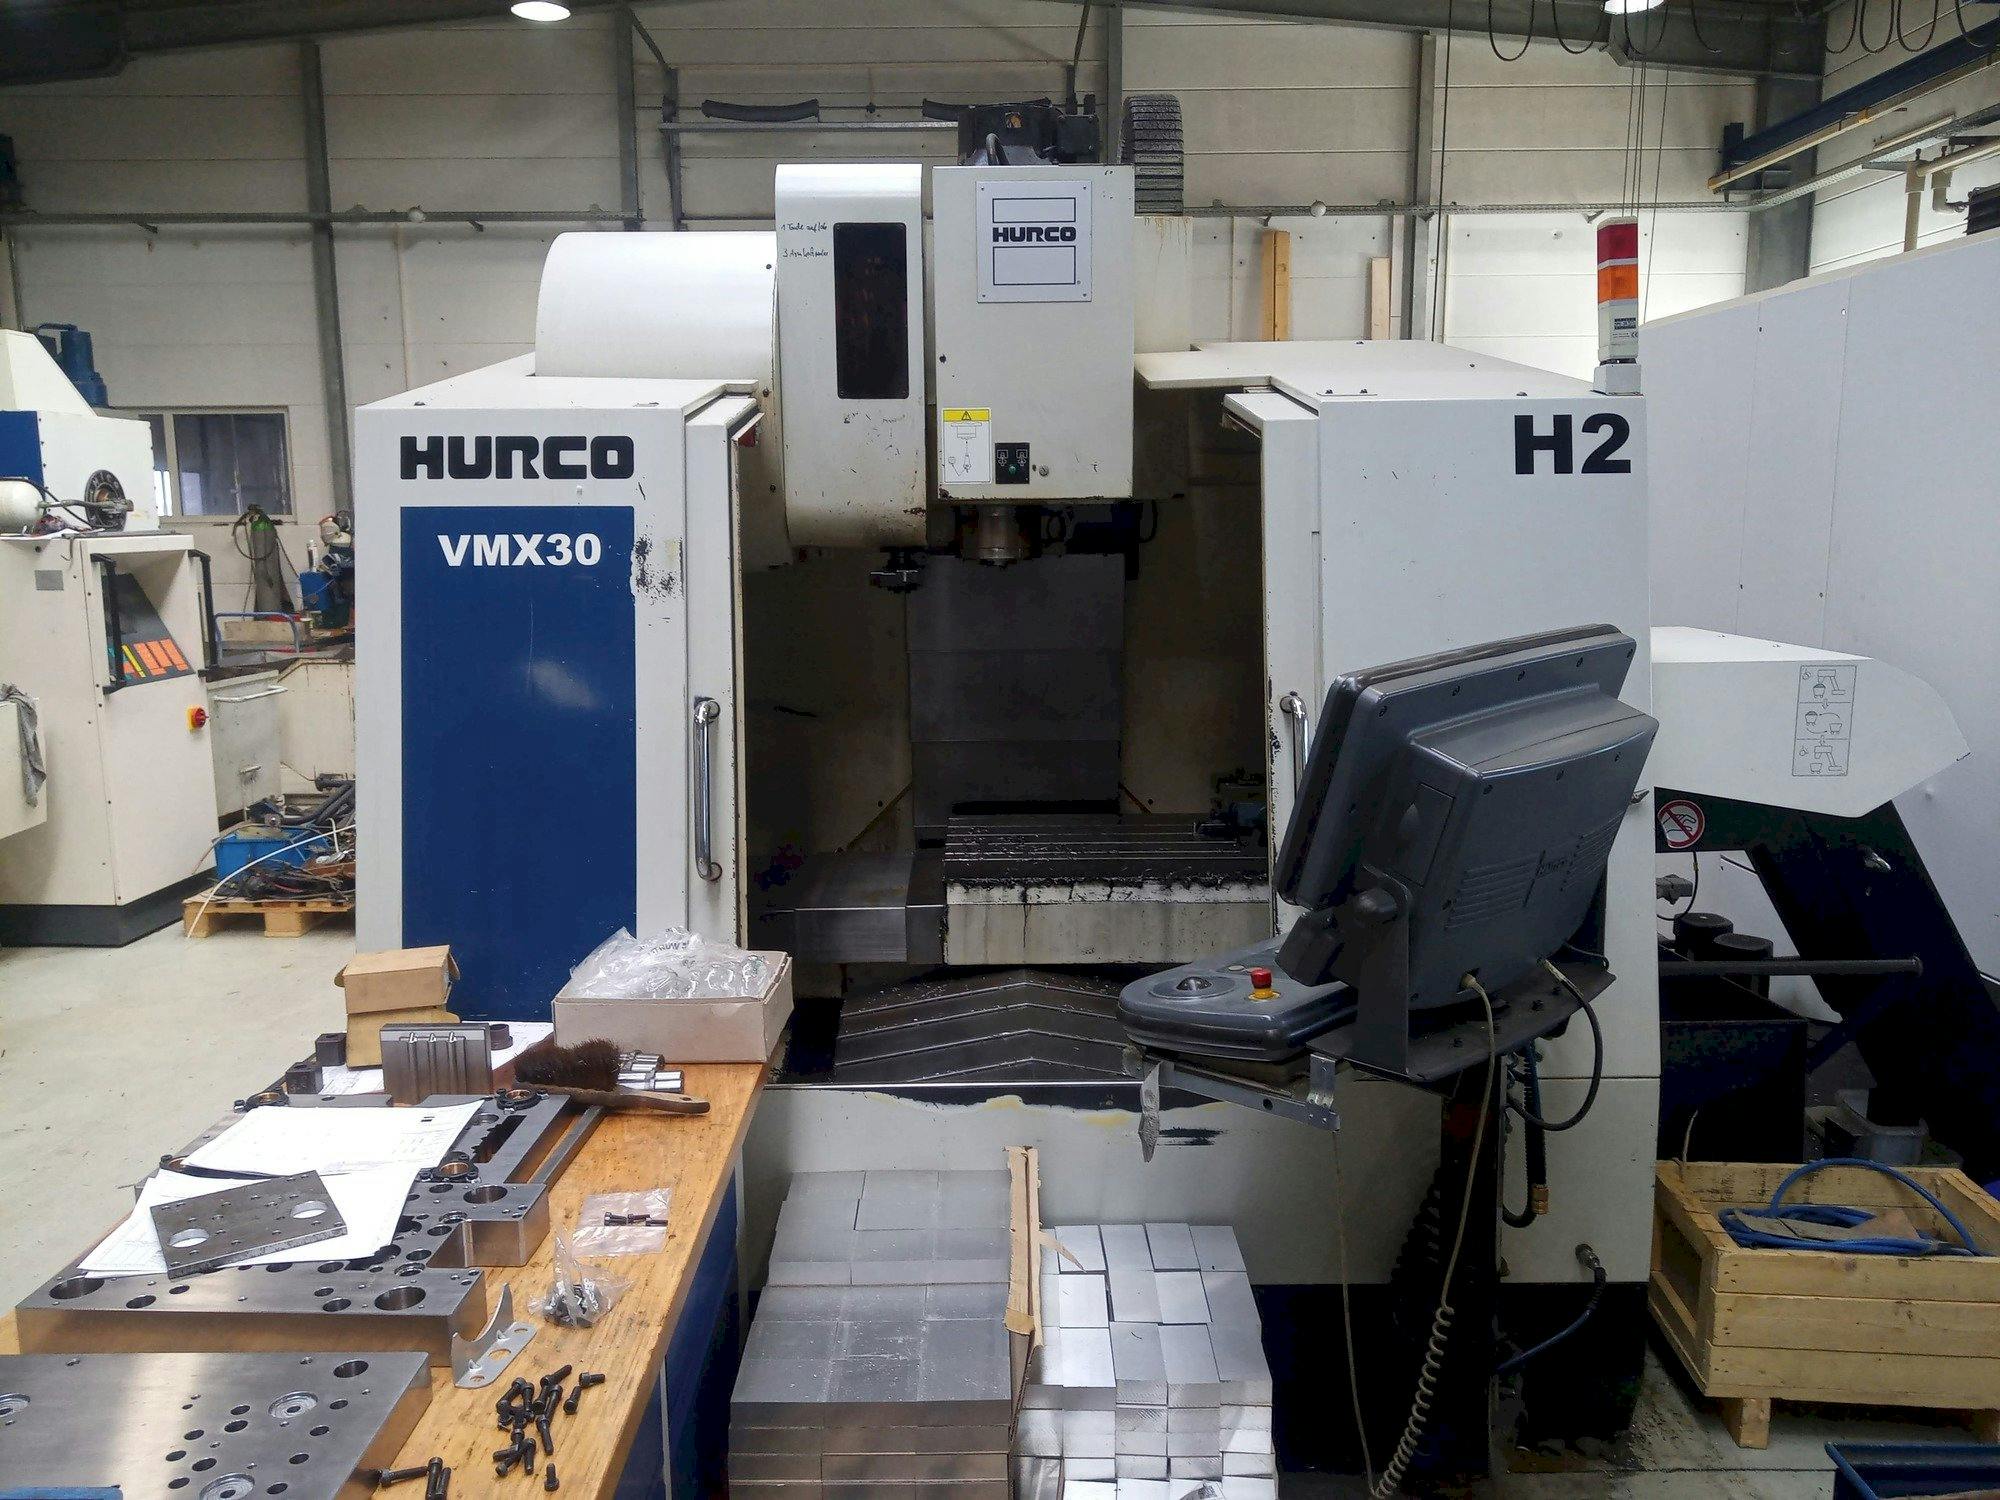 Front view of Hurco VMX30  machine